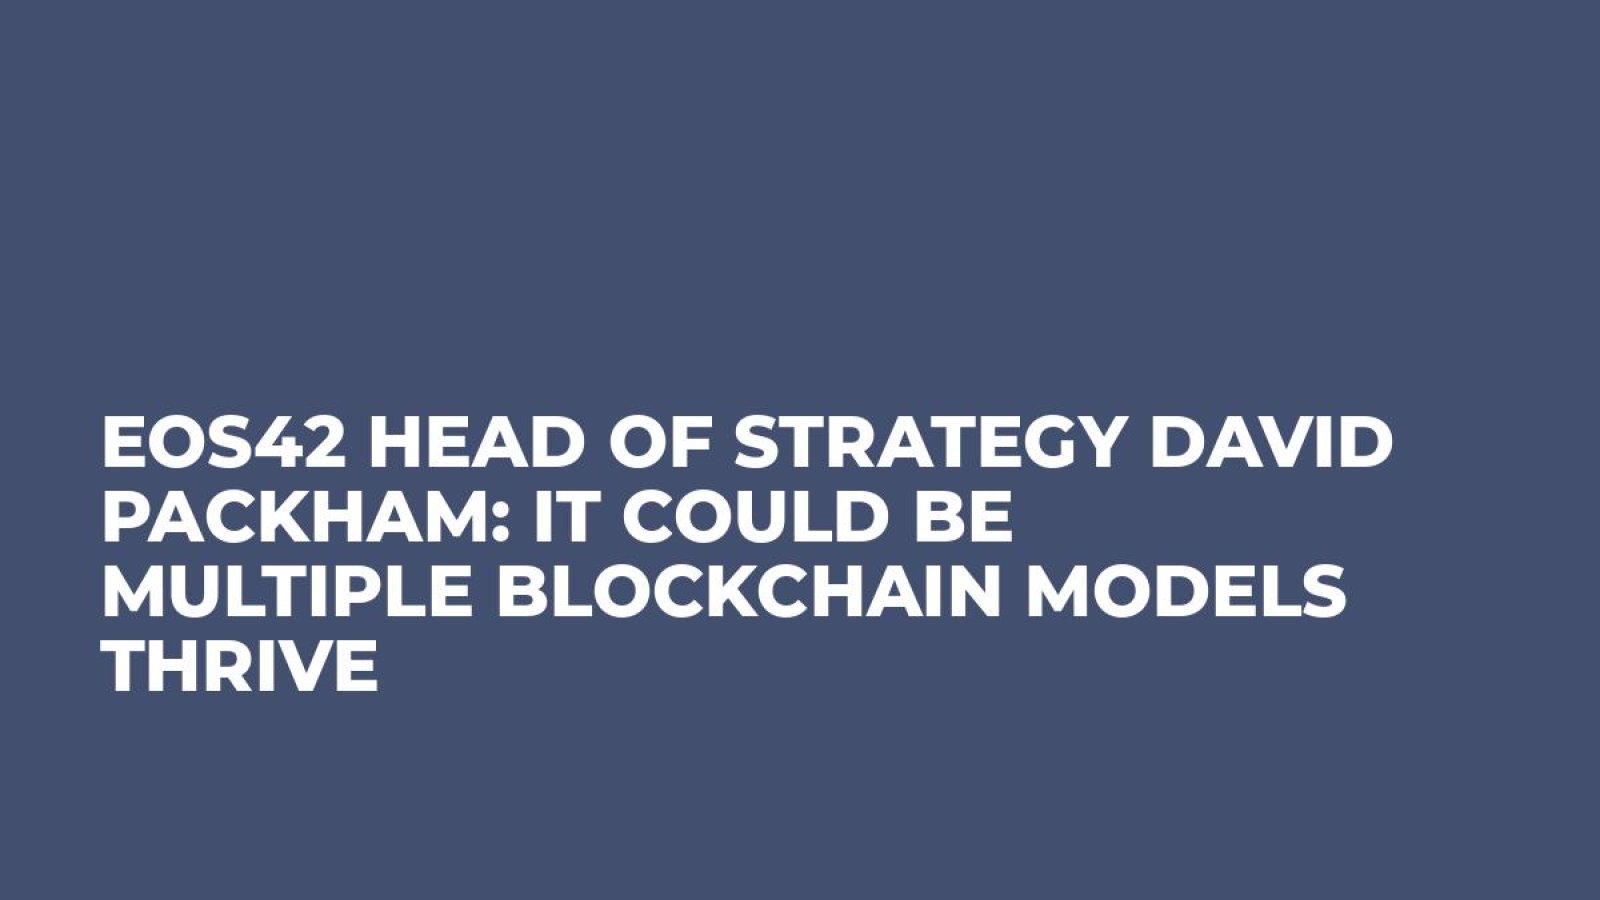 EOS42 Head of Strategy David Packham: It Could Be Multiple Blockchain Models Thrive 